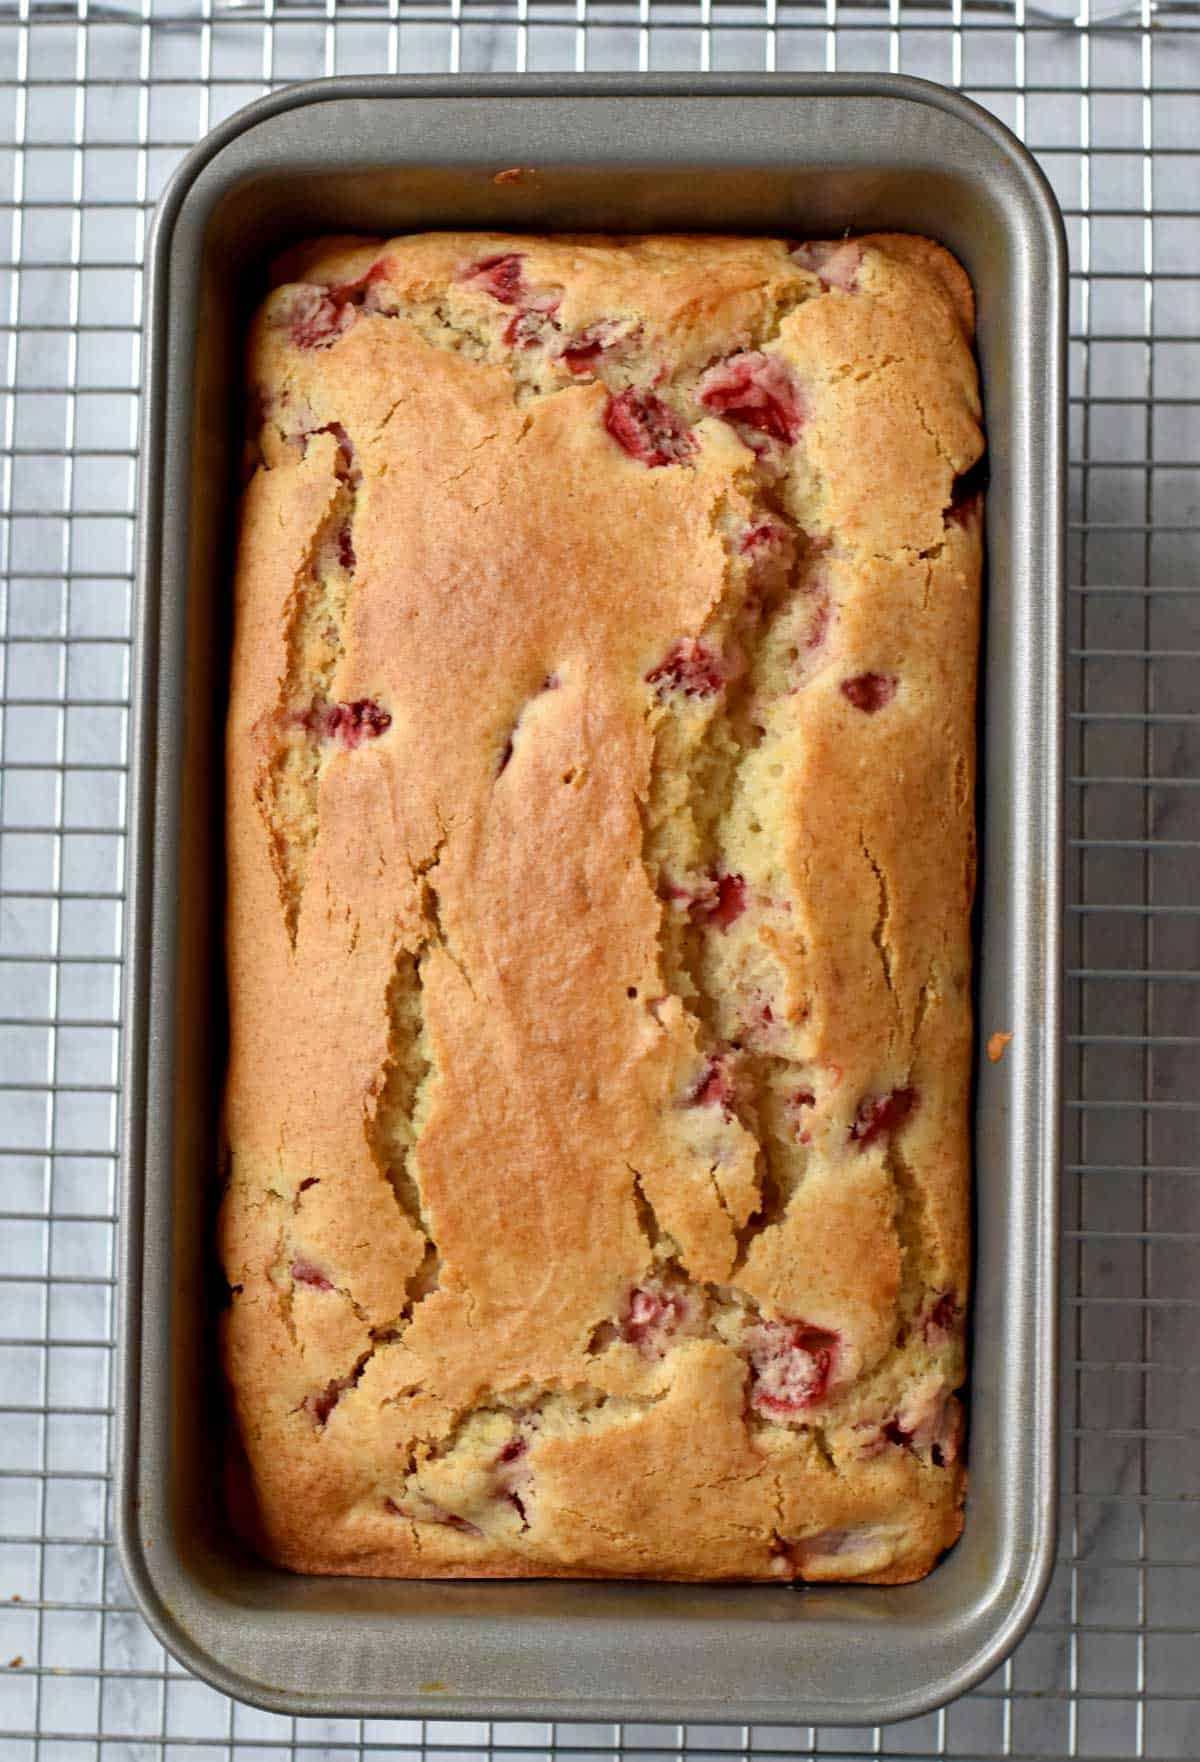 Baked gluten free strawberry bread in loaf pan cooling on wire rack.